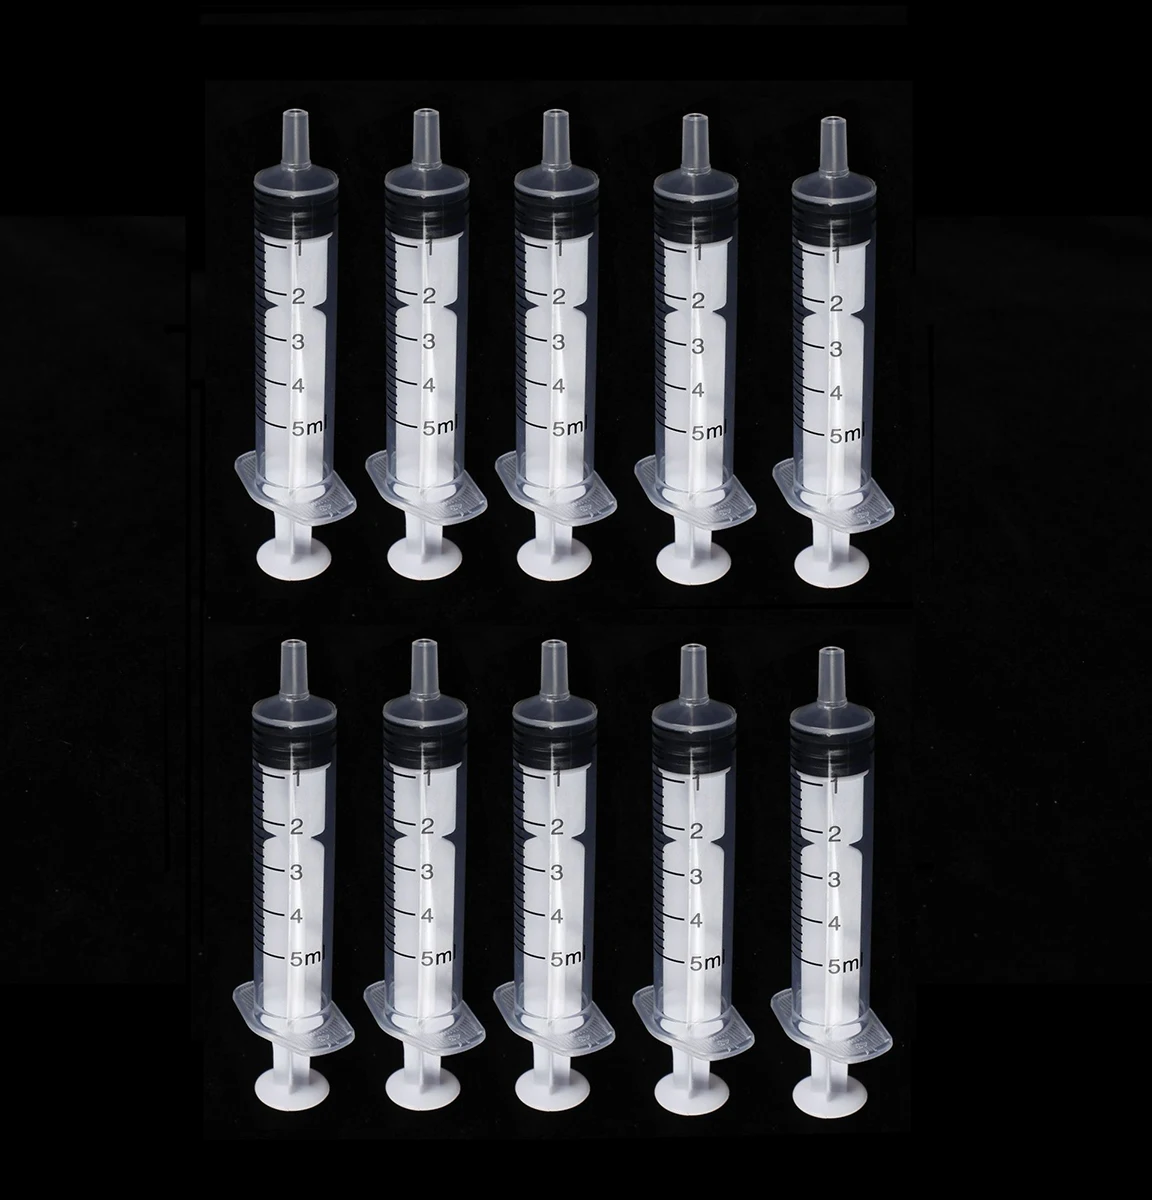 

Plastic Packaged Lock Individually Injector Disposable Nutrient Sterile Syringe Luer Measuring 5ml For Refilling Syringes